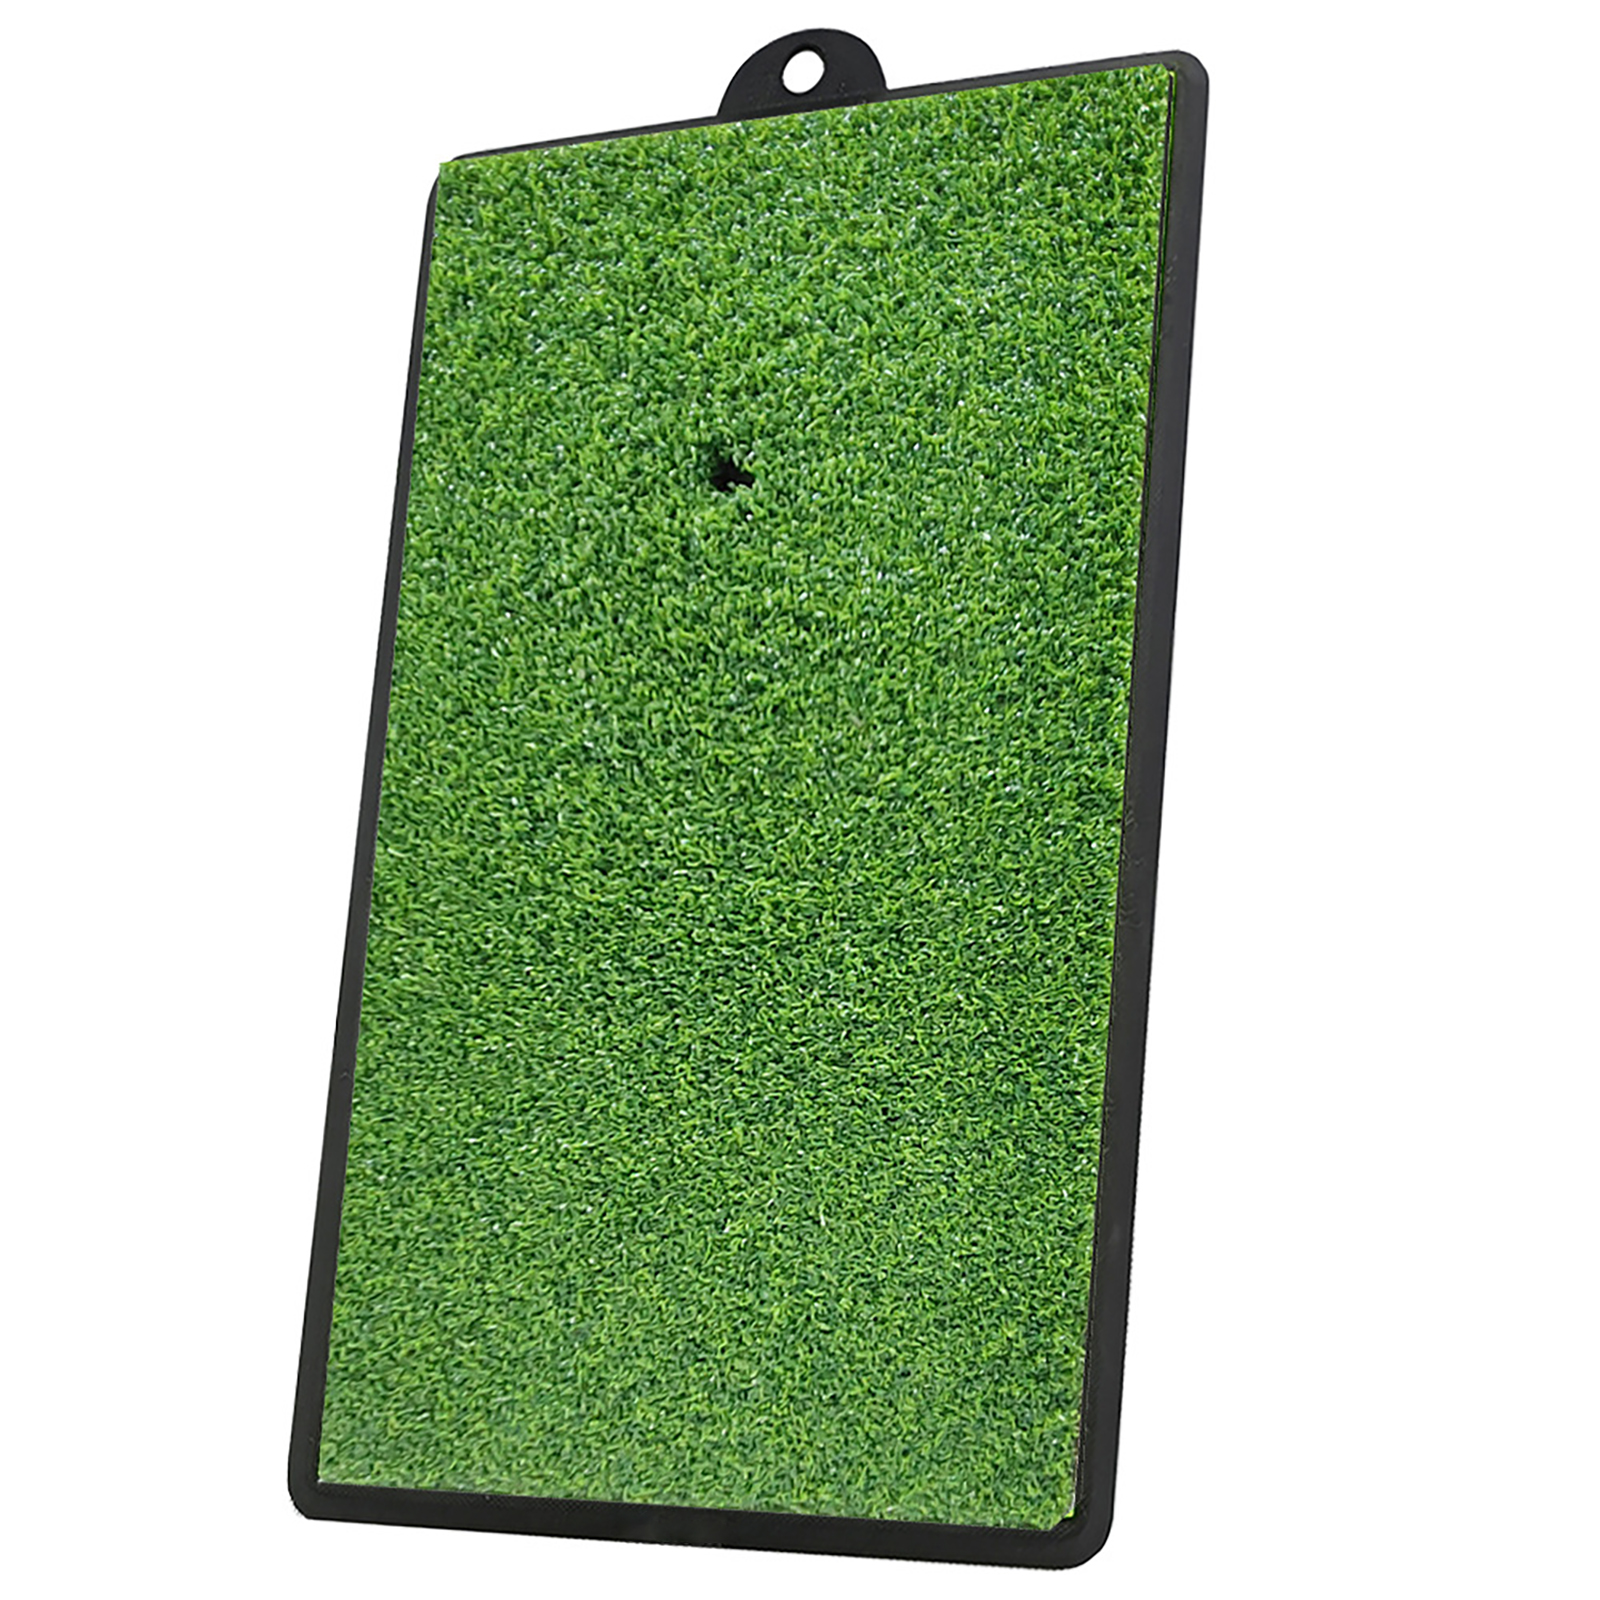 Golf Training Pad Rubber Batting Ball Trace Directional Mat Swing Path Pads Swing Practice Pads For Swing Detection